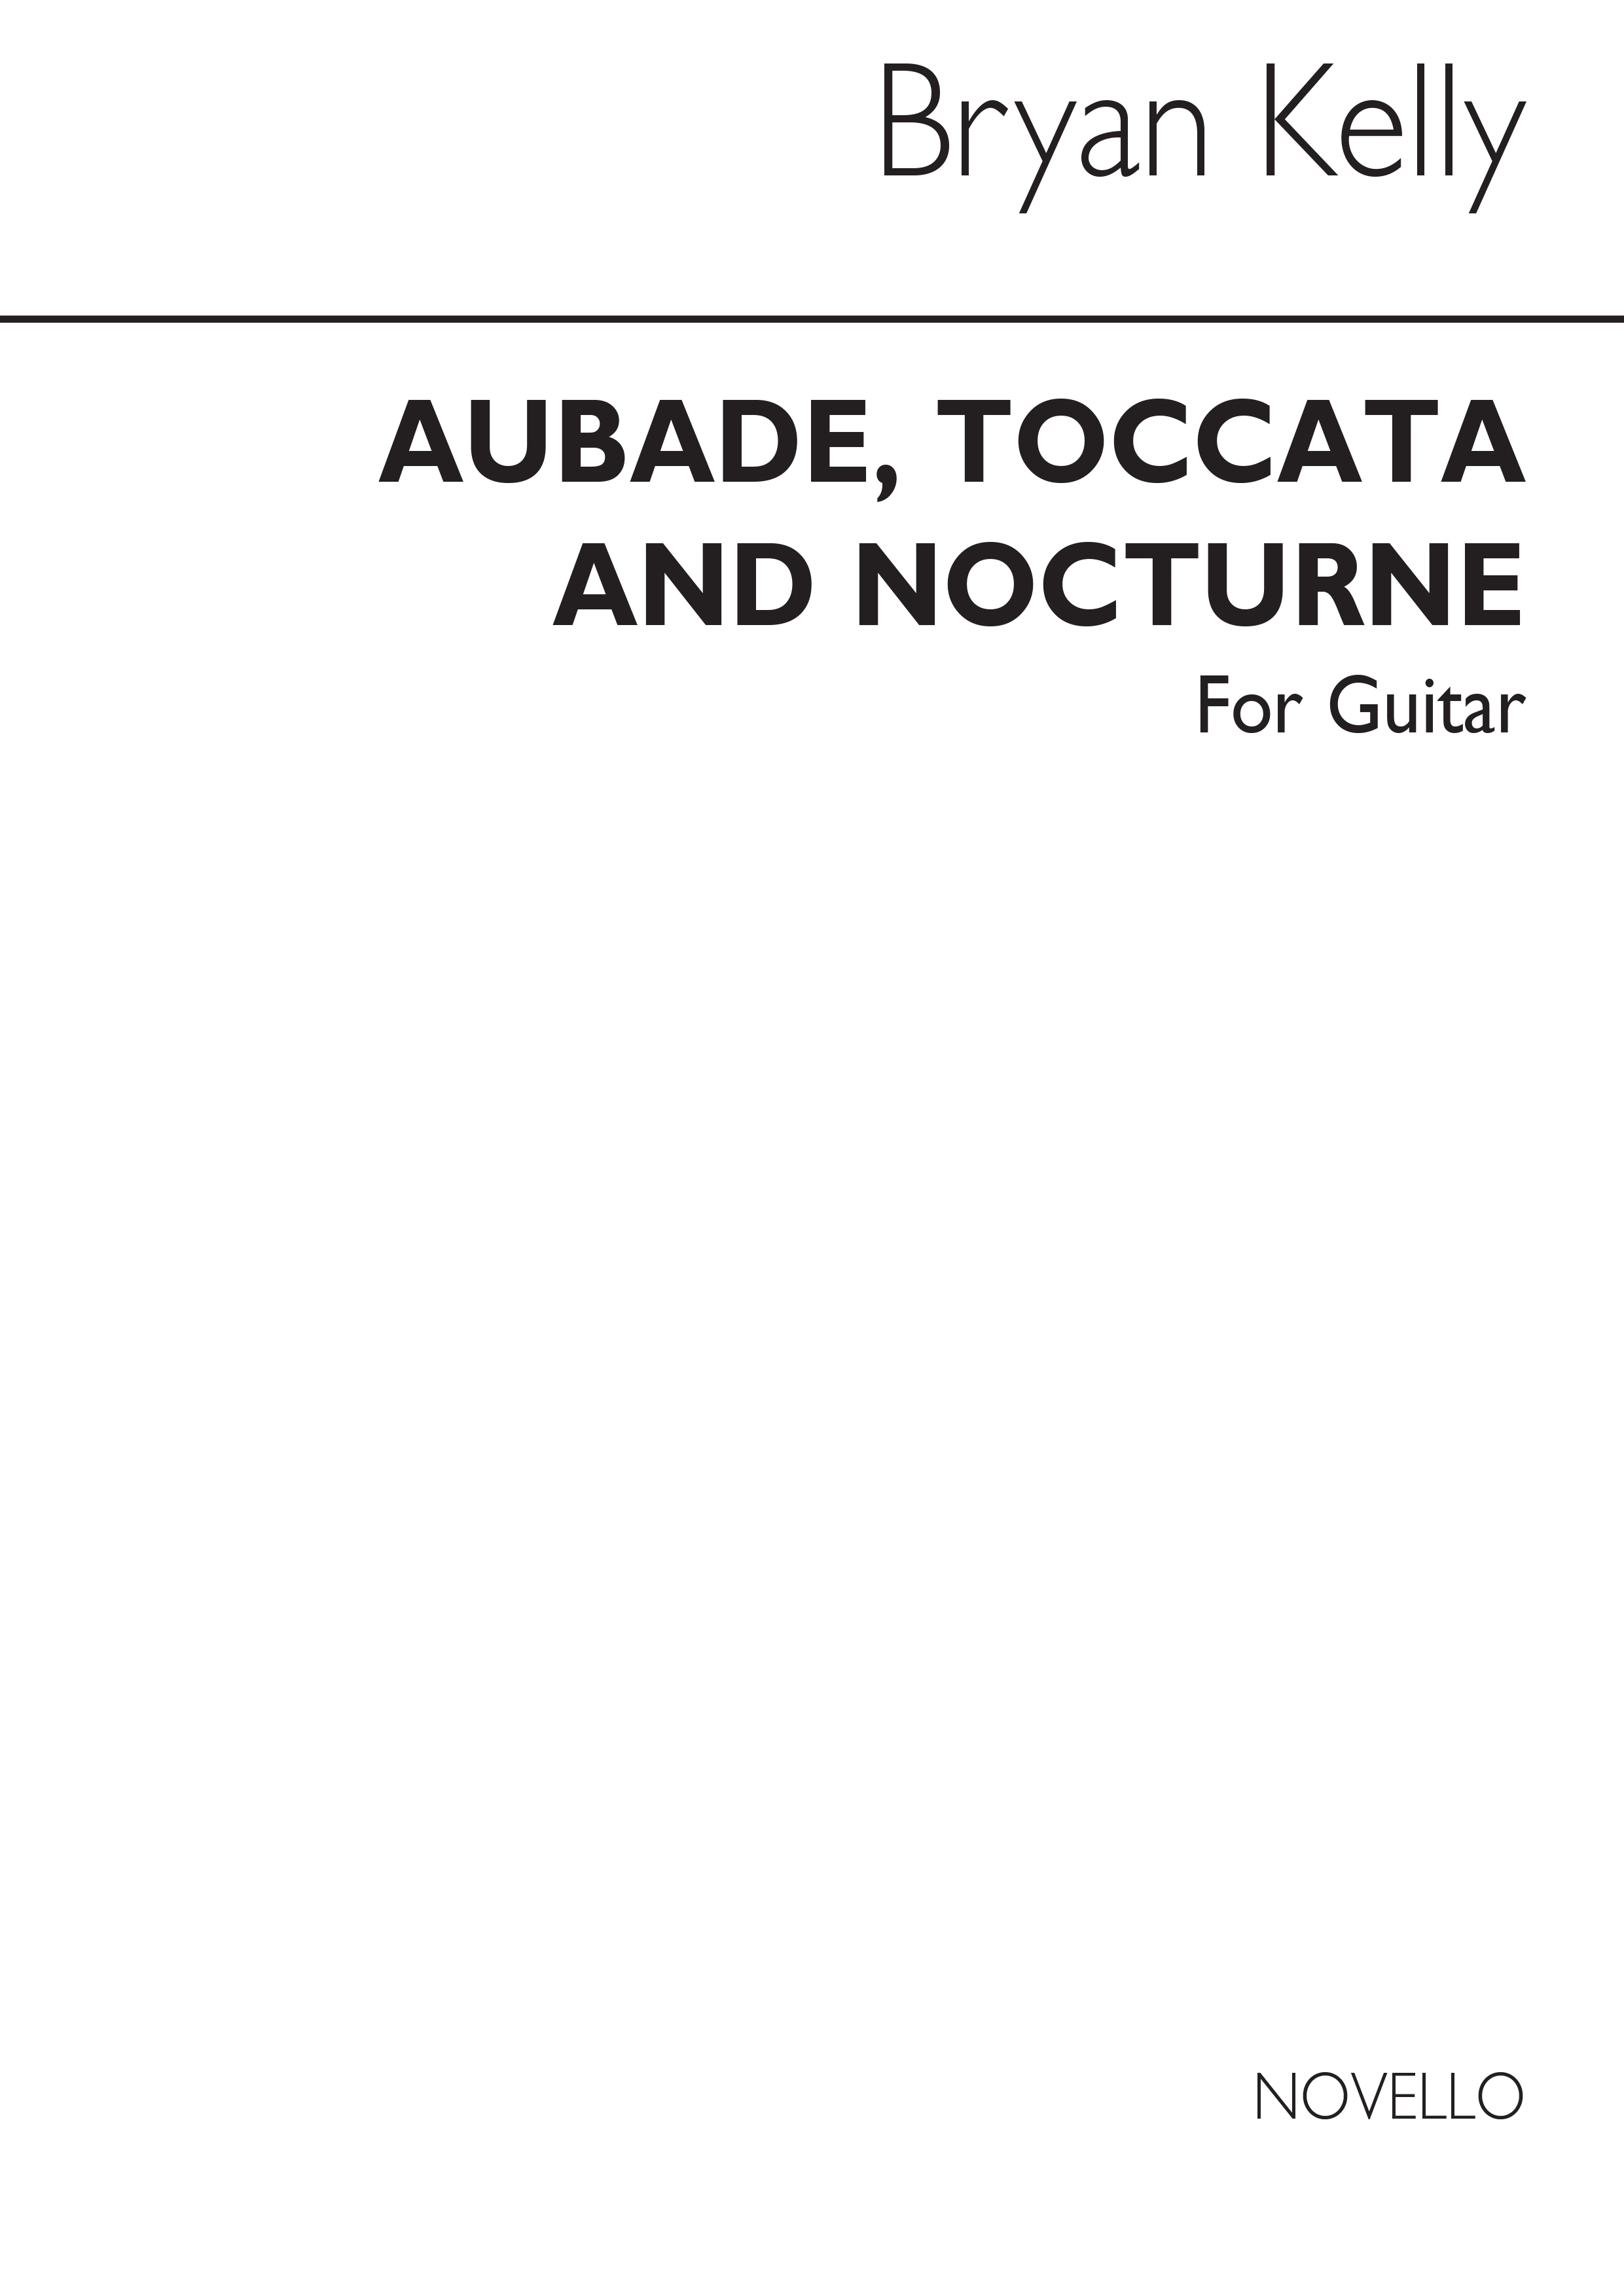 Bryan Kelly: Aubade, Toccata And Nocturne for Guitar